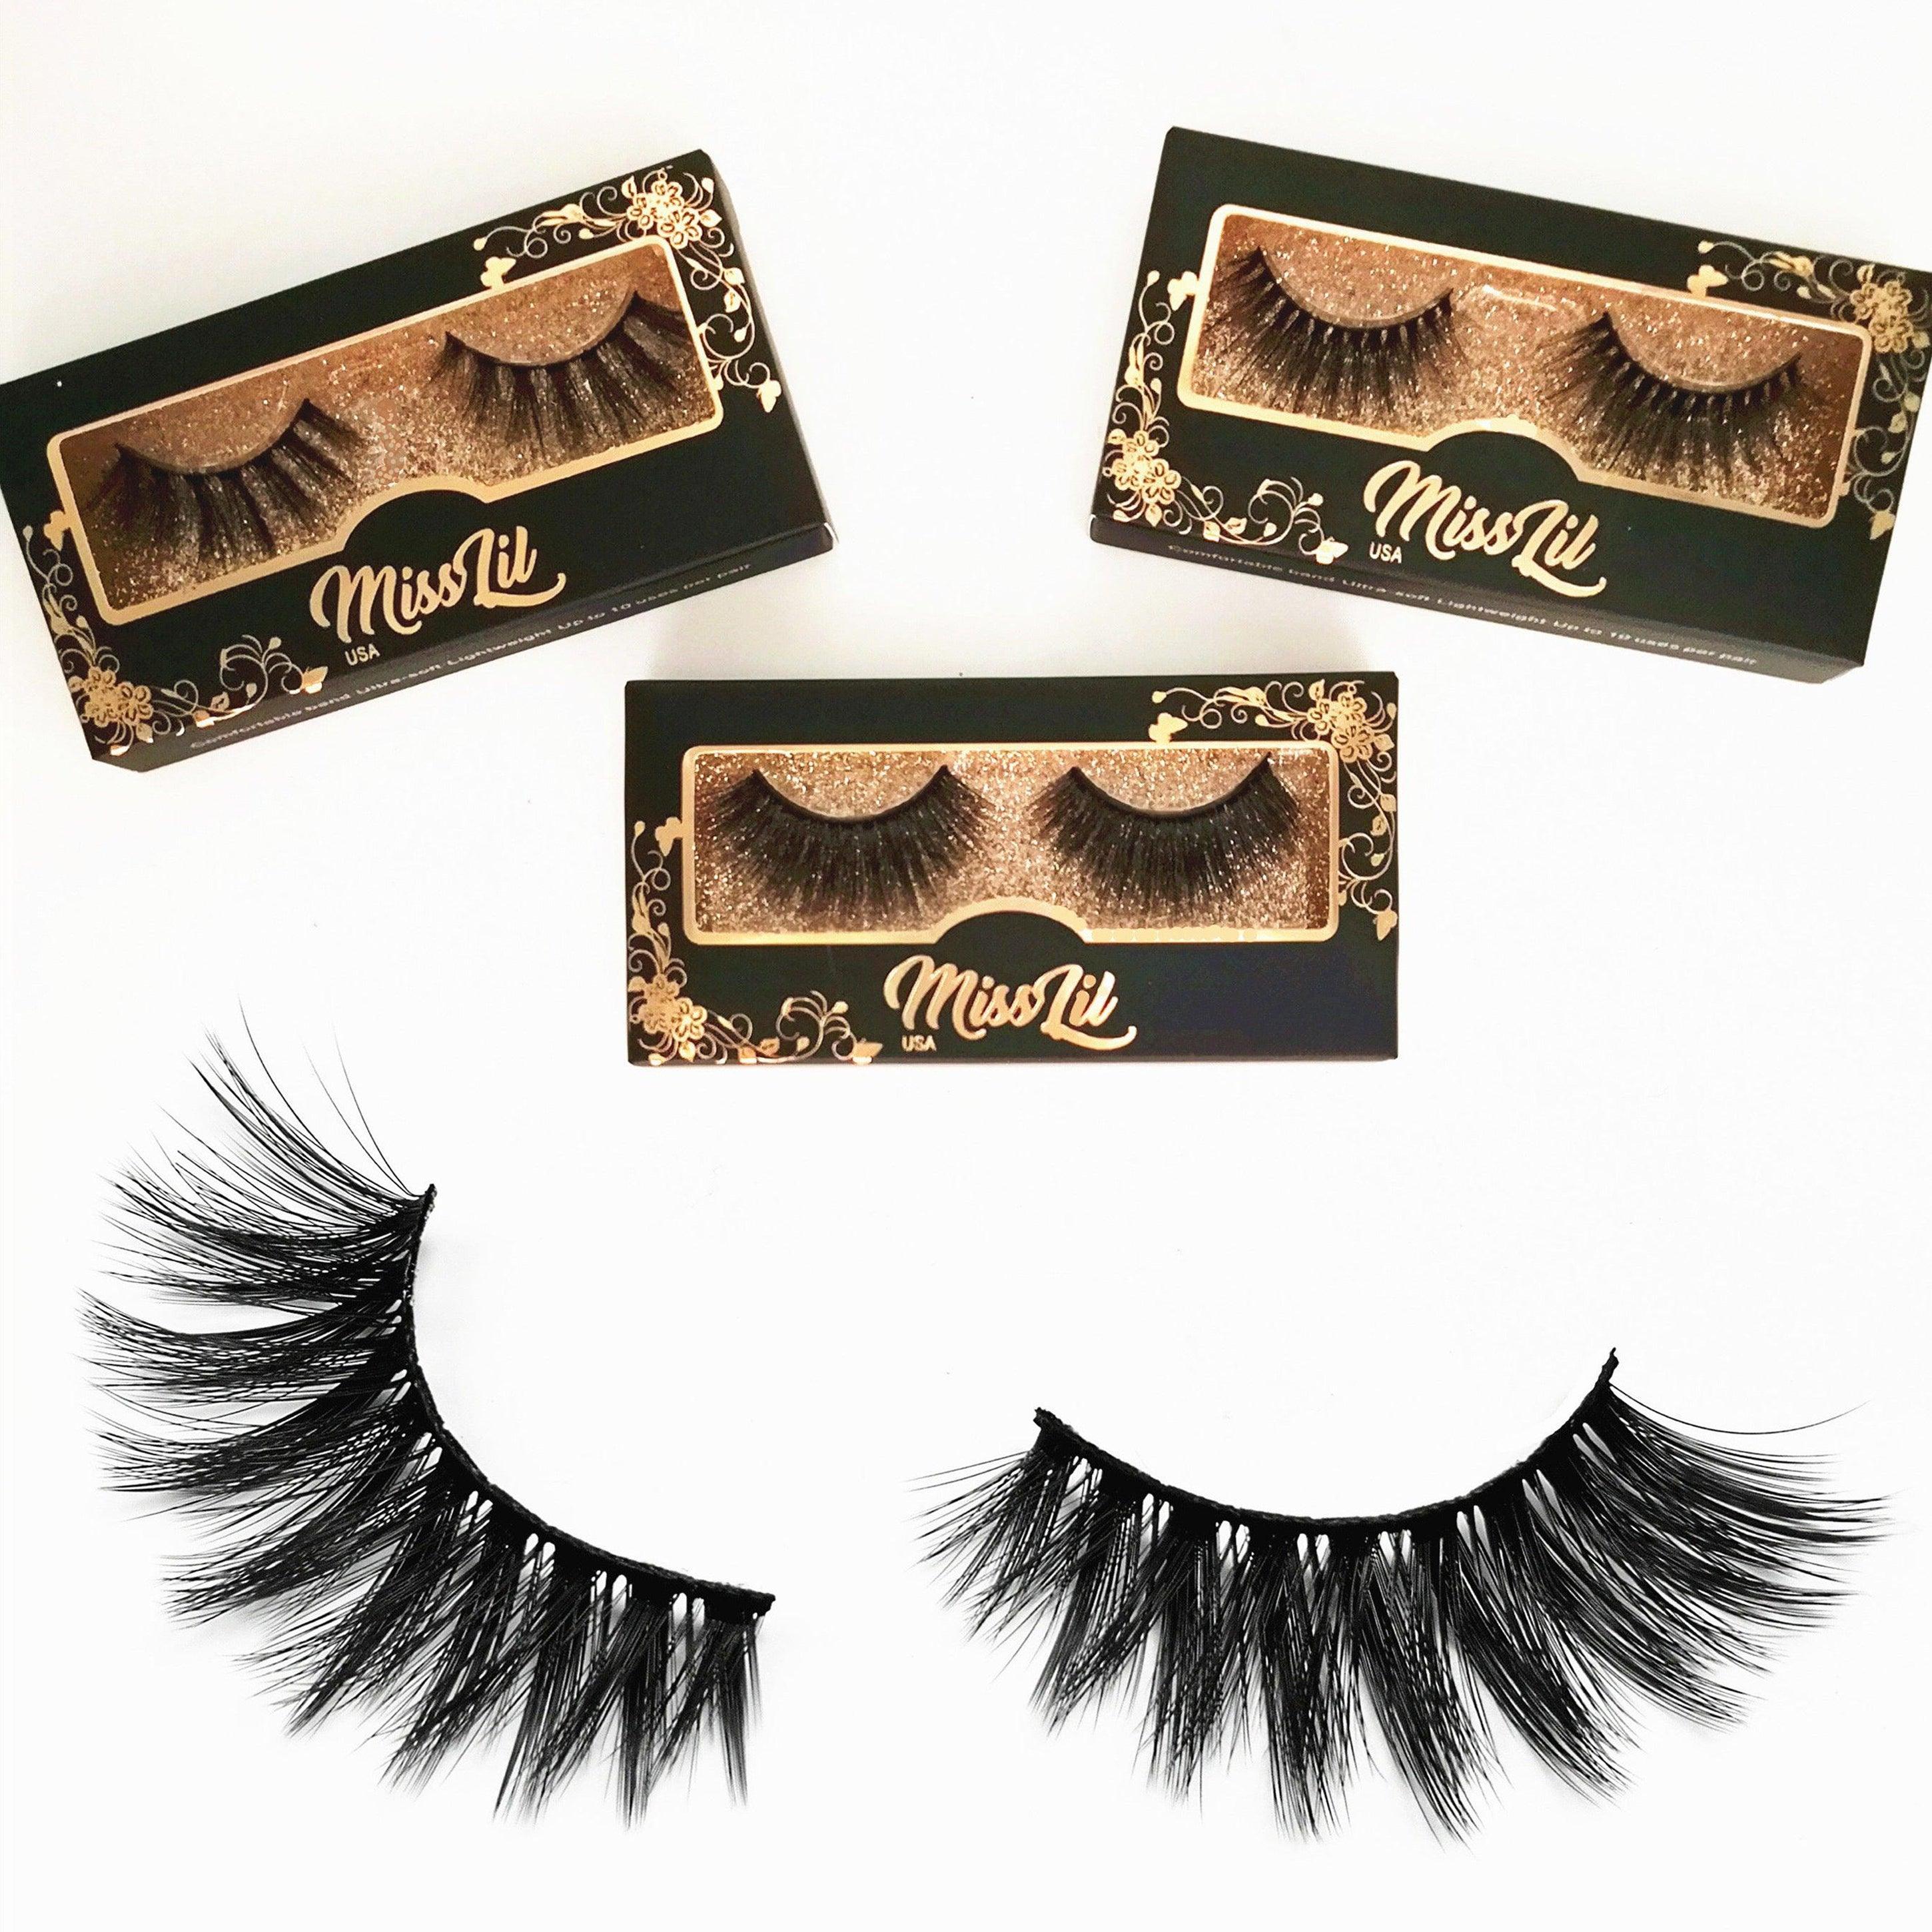 1-Pair Miss Lil USA Lashes #56 (Pack of 12) - Miss Lil USA Wholesale